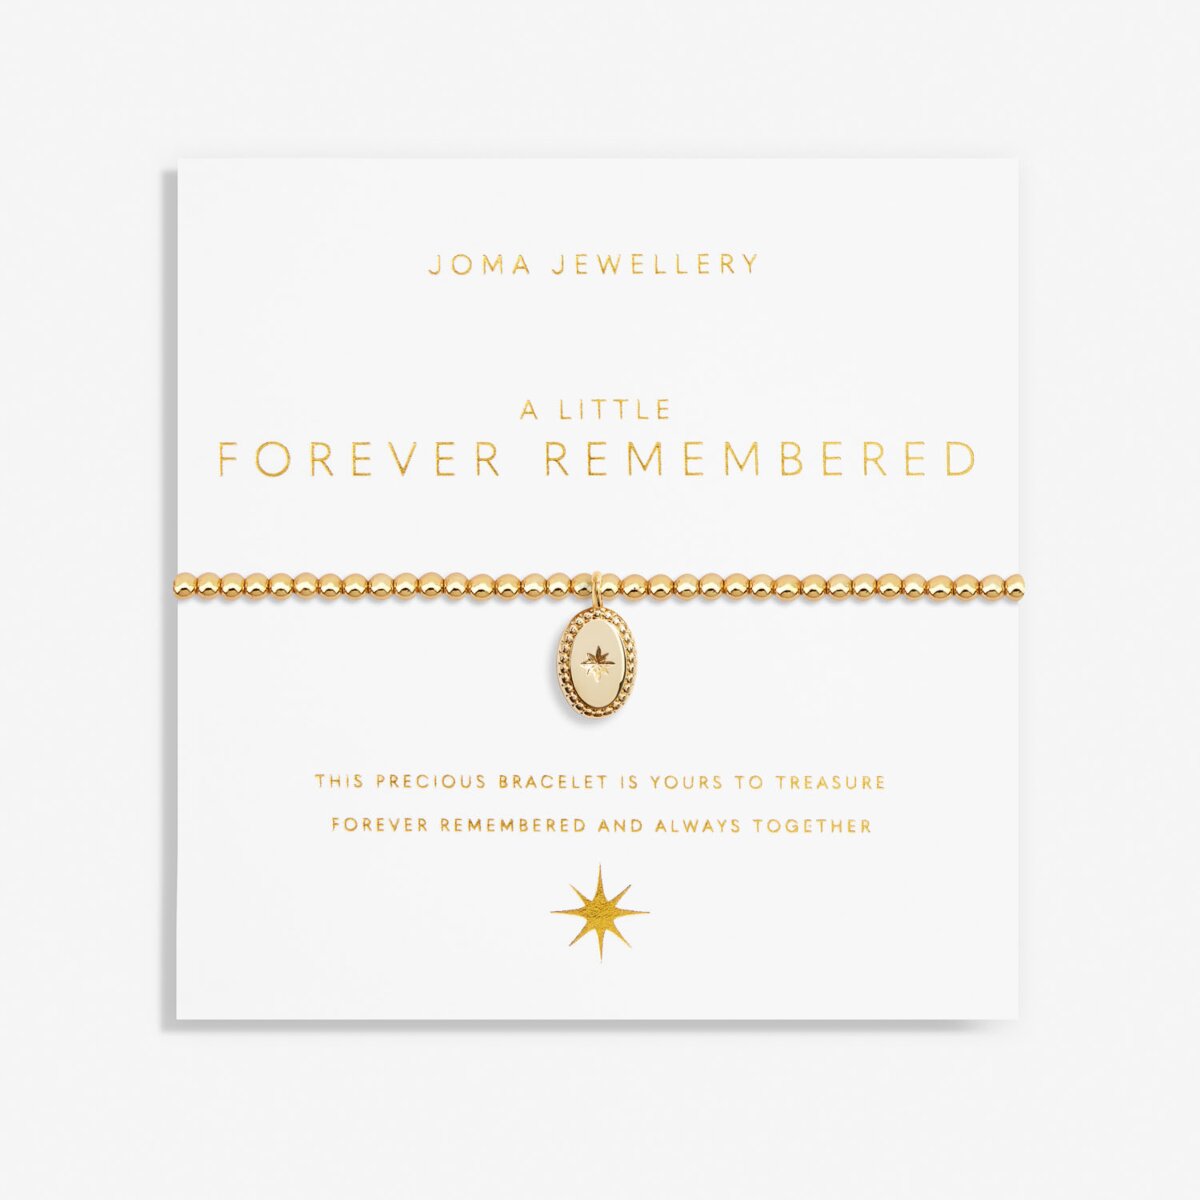 JOMA JEWELLERY | A LITTLE GOLD | FOREVER REMEMBERED BRACELET